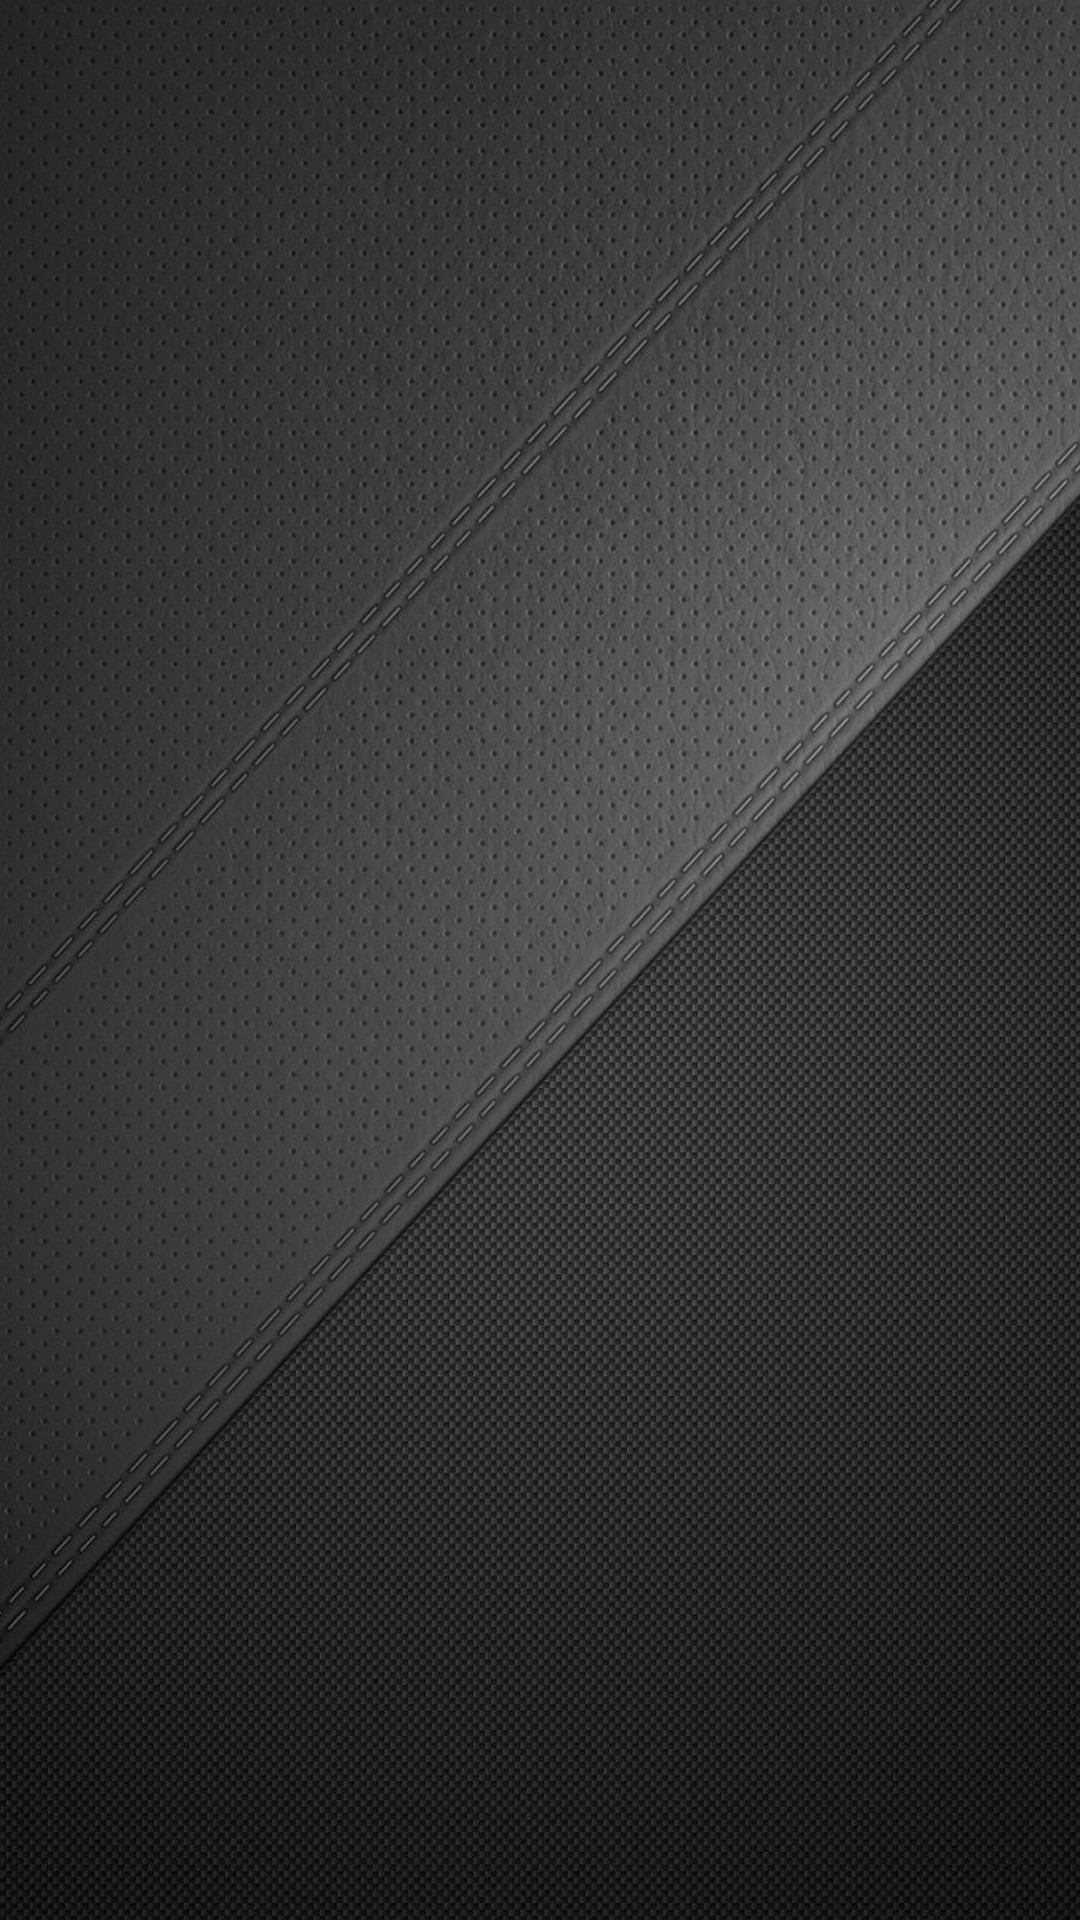 1080x1920 Android-L-Material-Design-Wallpapers-3.jpg .